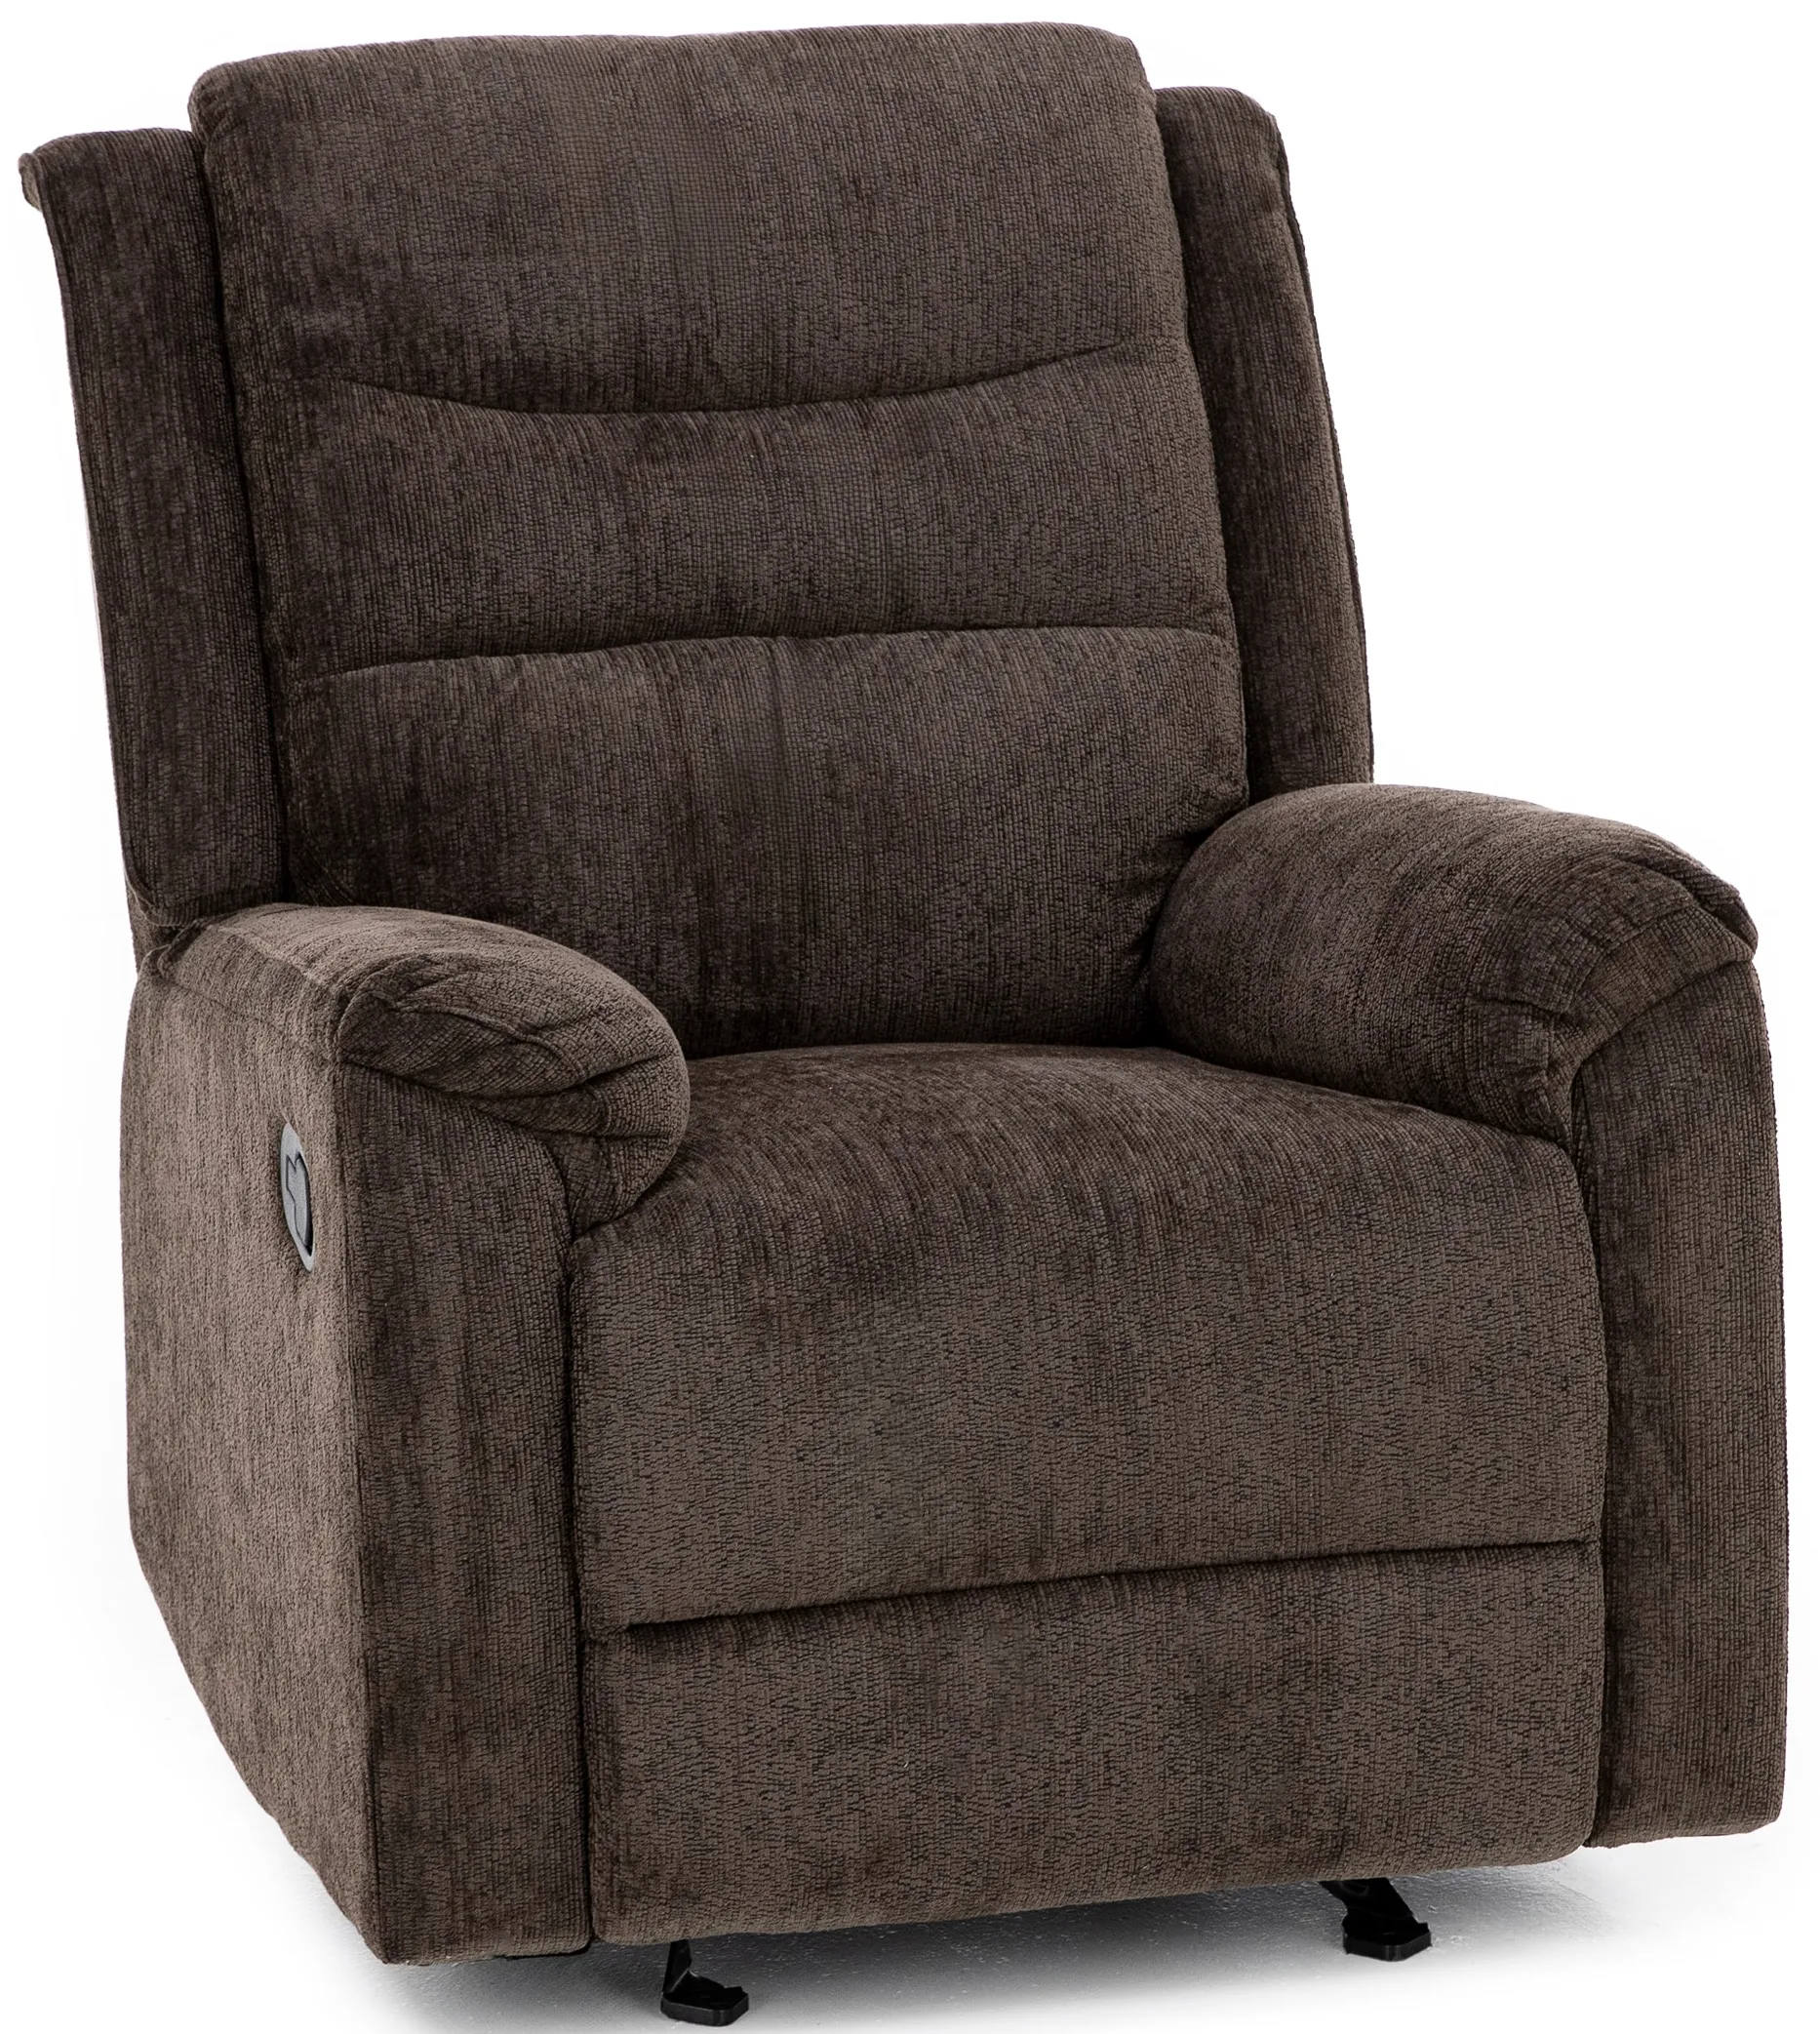 Abbey Glider Recliner in Chocolate